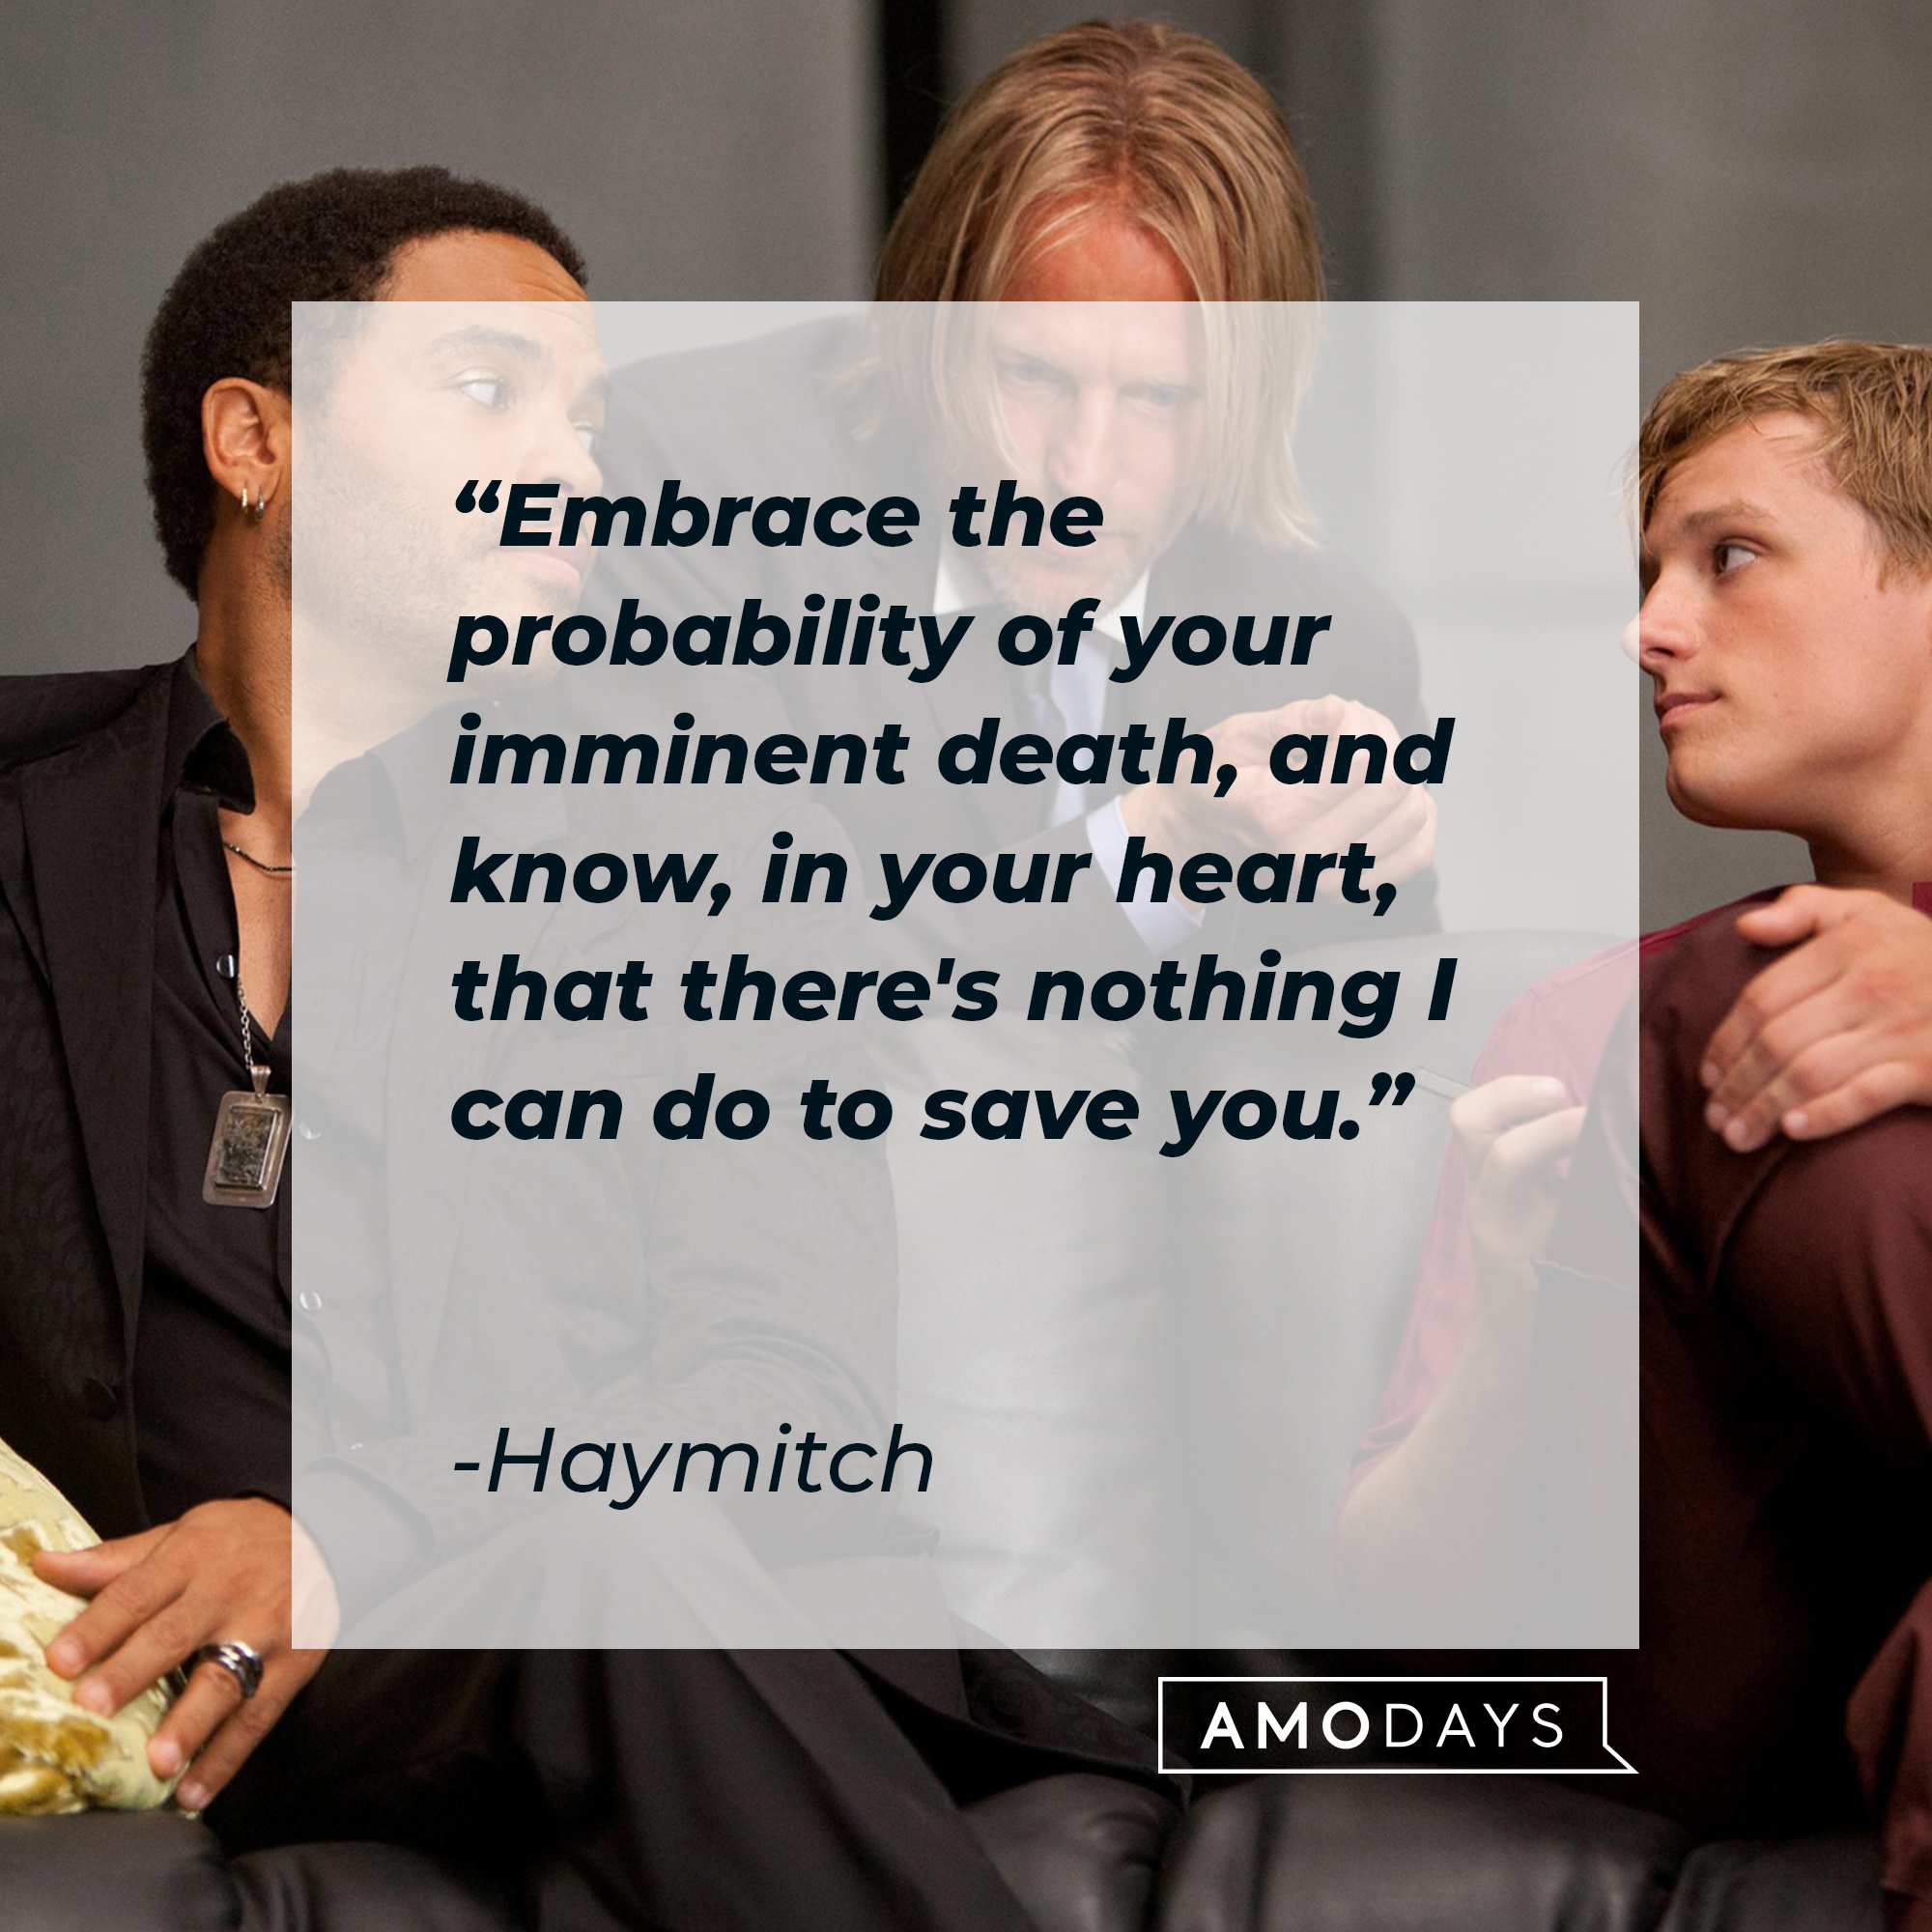 Haymitch's quote: "Embrace the probability of your imminent death, and know, in your heart, that there's nothing I can do to save you." | Source: facebook.com/TheHungerGamesMovie